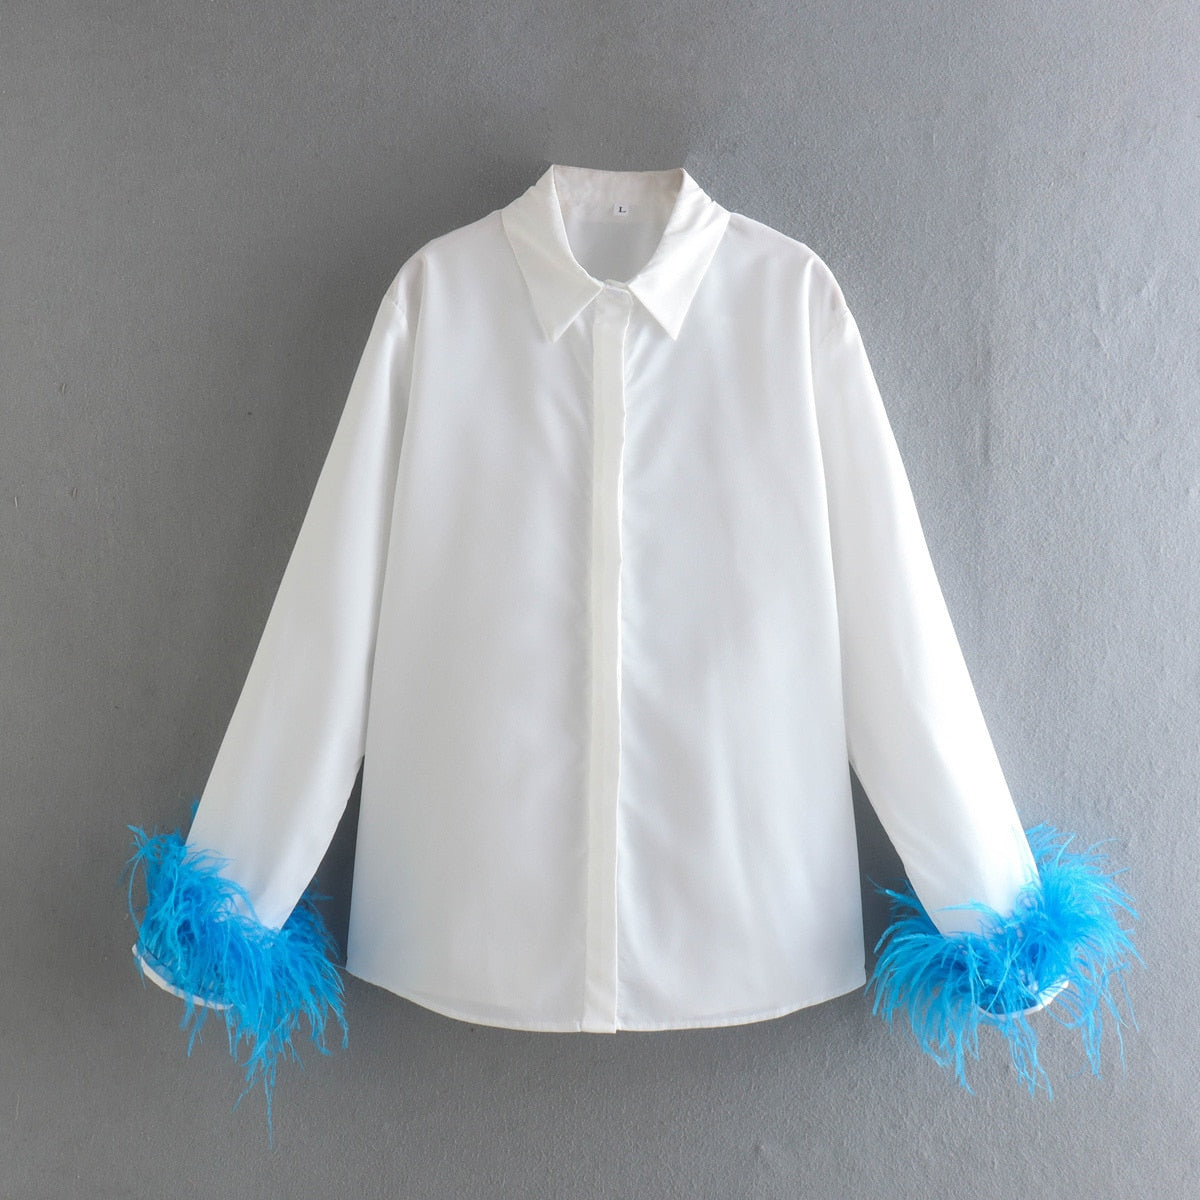 Green Feathers on the Cuffs Womens Blouses Long Sleeves 